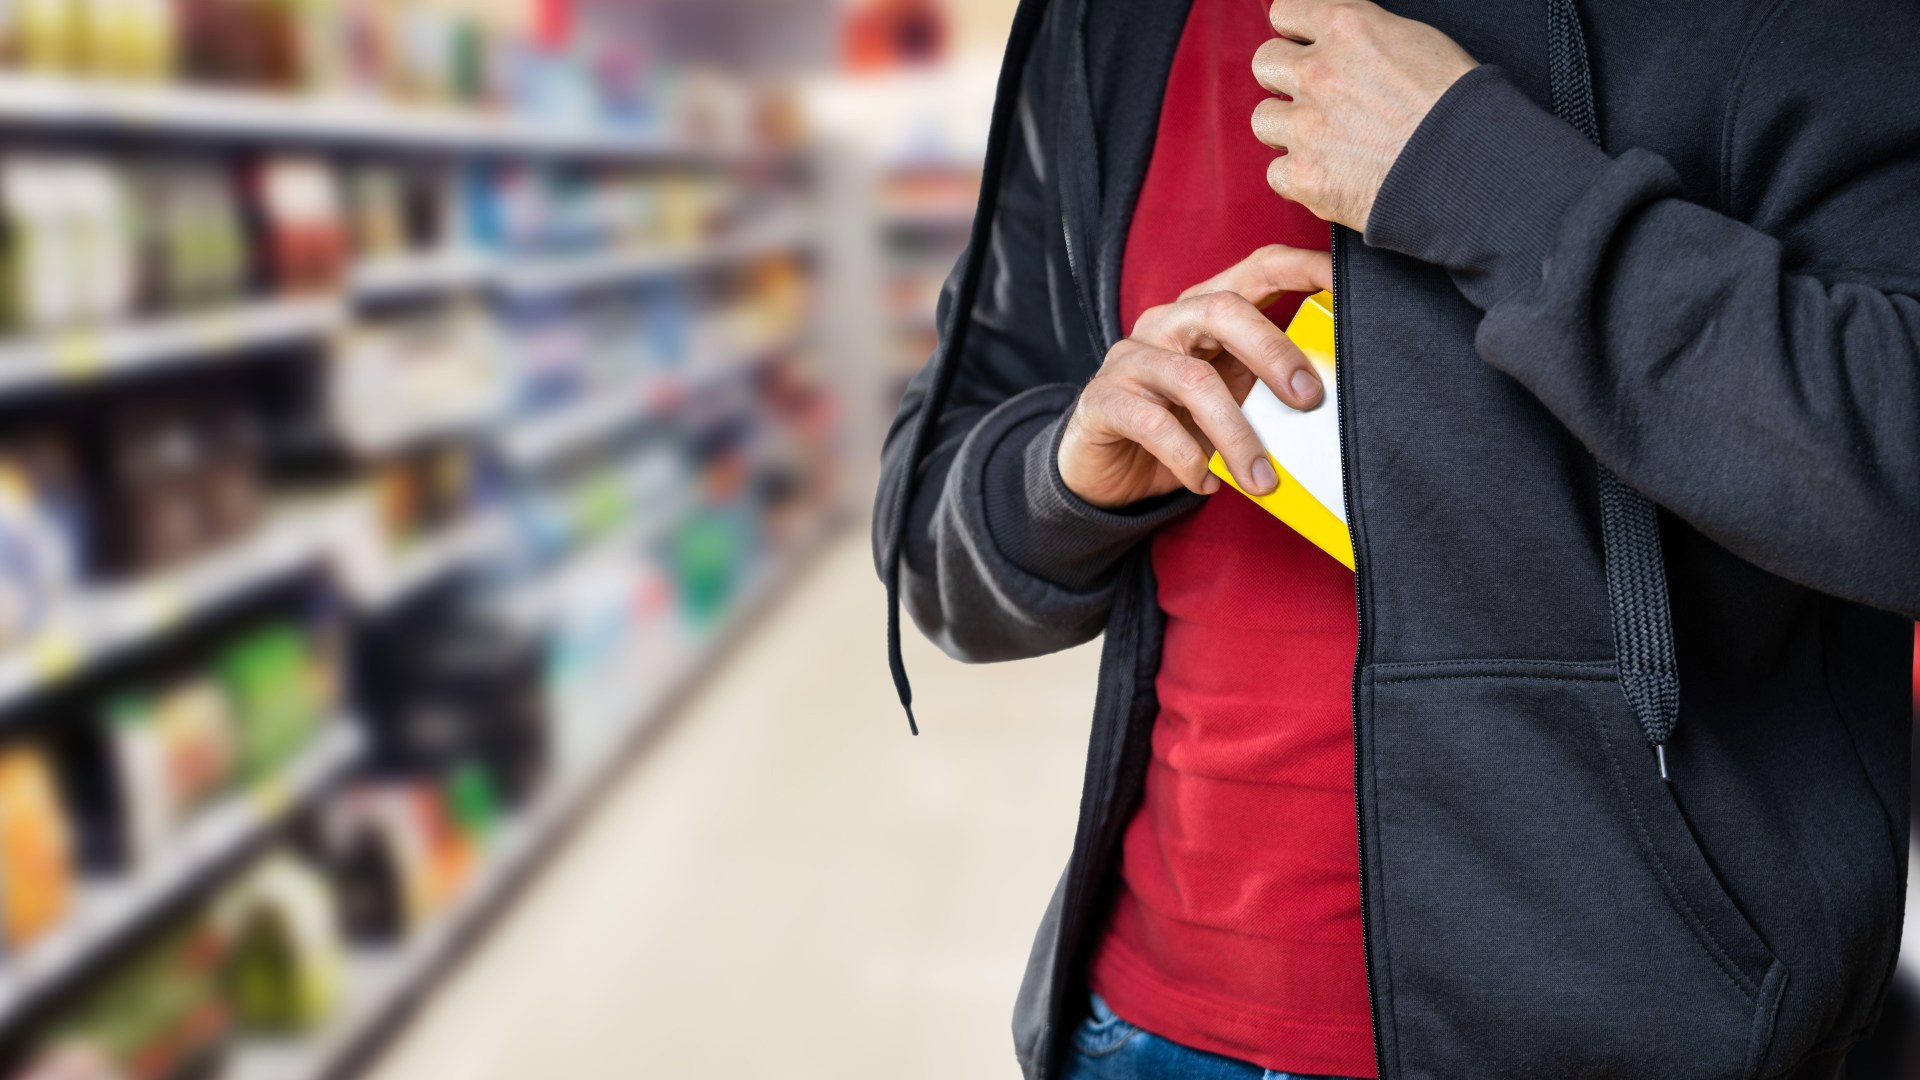 Shoplifting isnt a victimless crime – we all suffer and here’s how [Video]